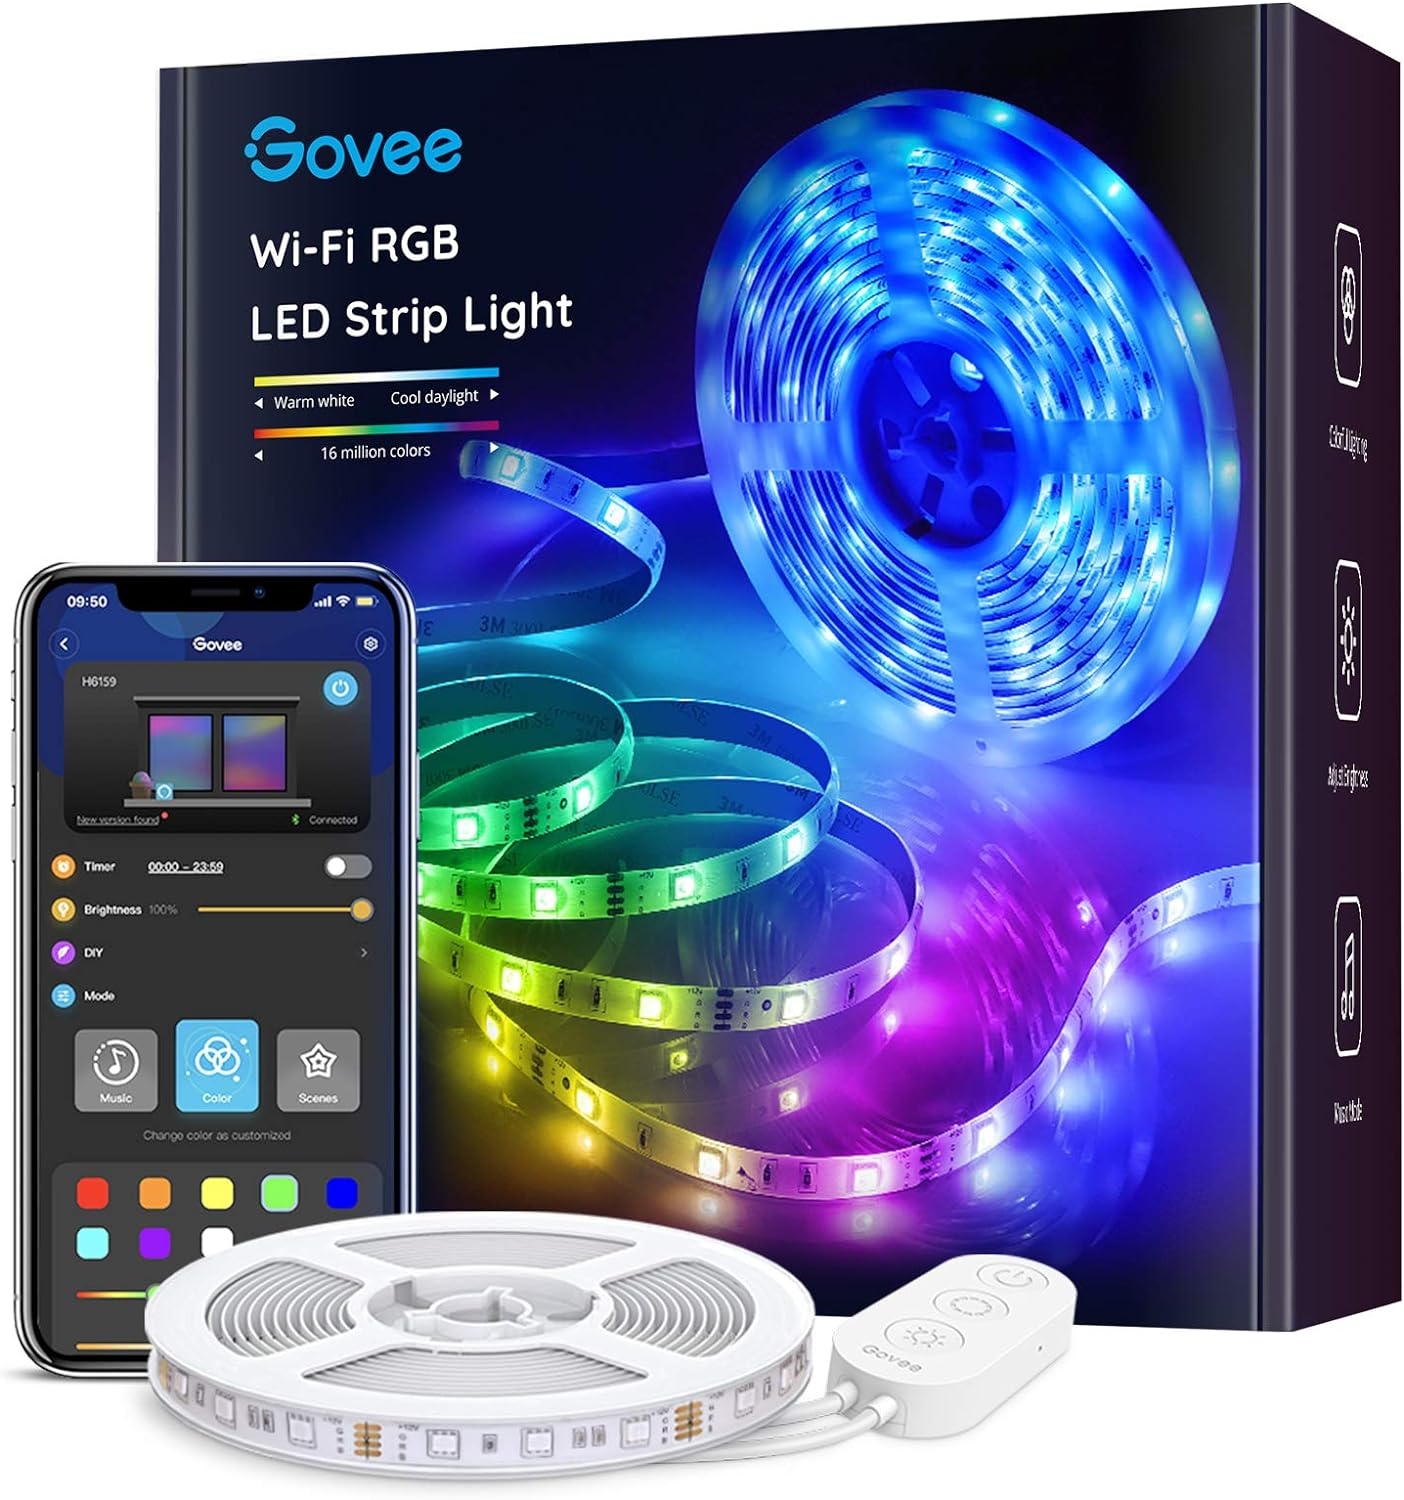 Govee Smart LED Strip Lights, 16.4ft WiFi LED Lights Work with Alexa and Google Assistant, Bright 5050 LEDs, 16 Million Colors with App Control and Music Sync for Home, Kitchen, TV, Party